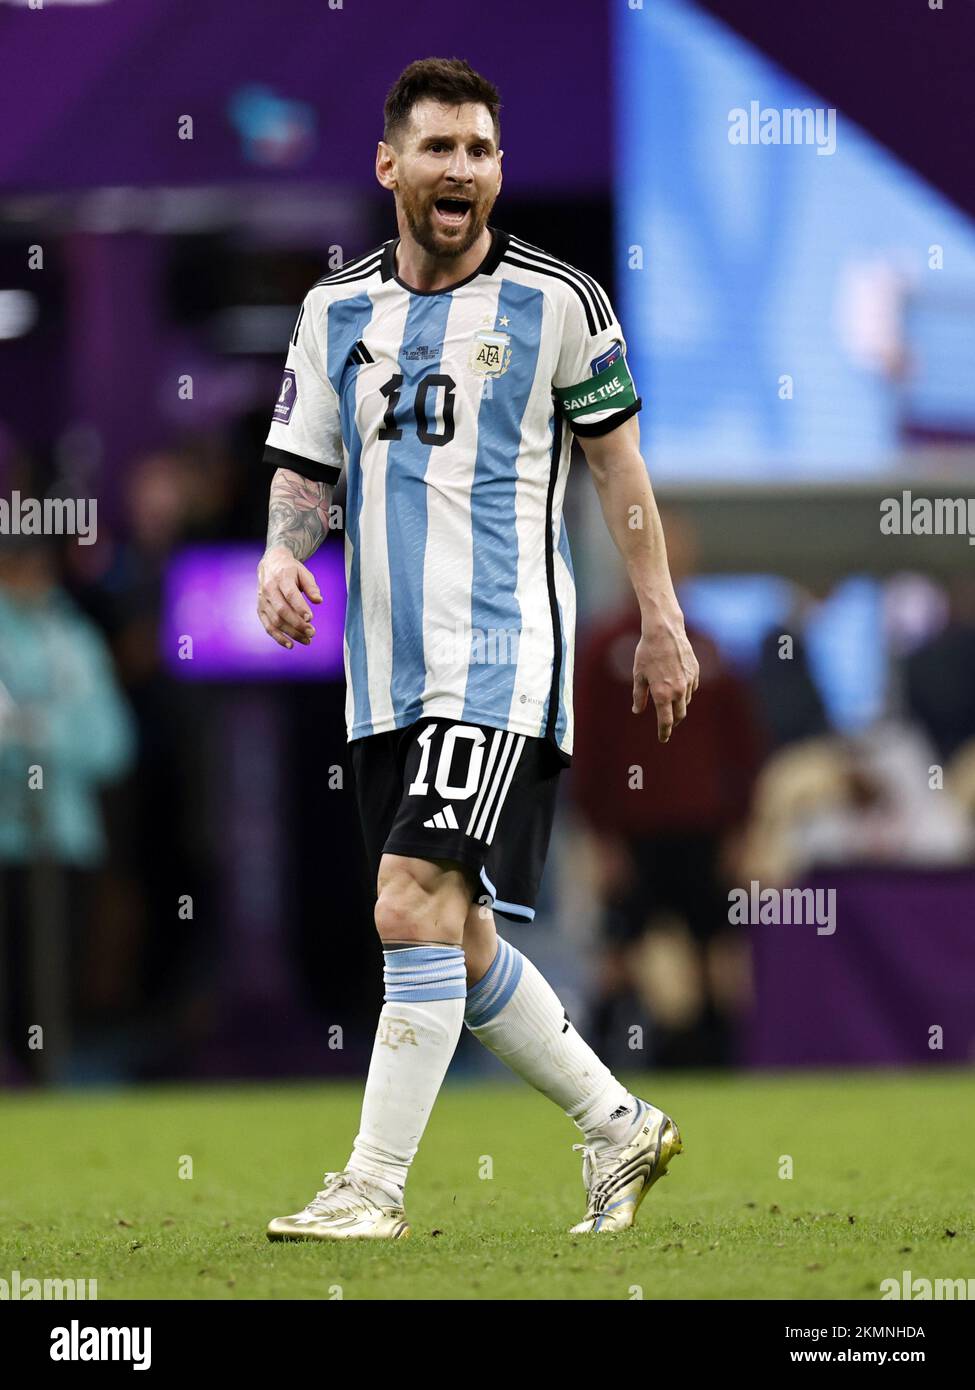 LUSAIL CITY - Lionel Messi of Argentina during the FIFA World Cup Qatar  2022 group C match between Argentina and Mexico at Lusail Stadium on  November 26, 2022 in Lusail City, Qatar.